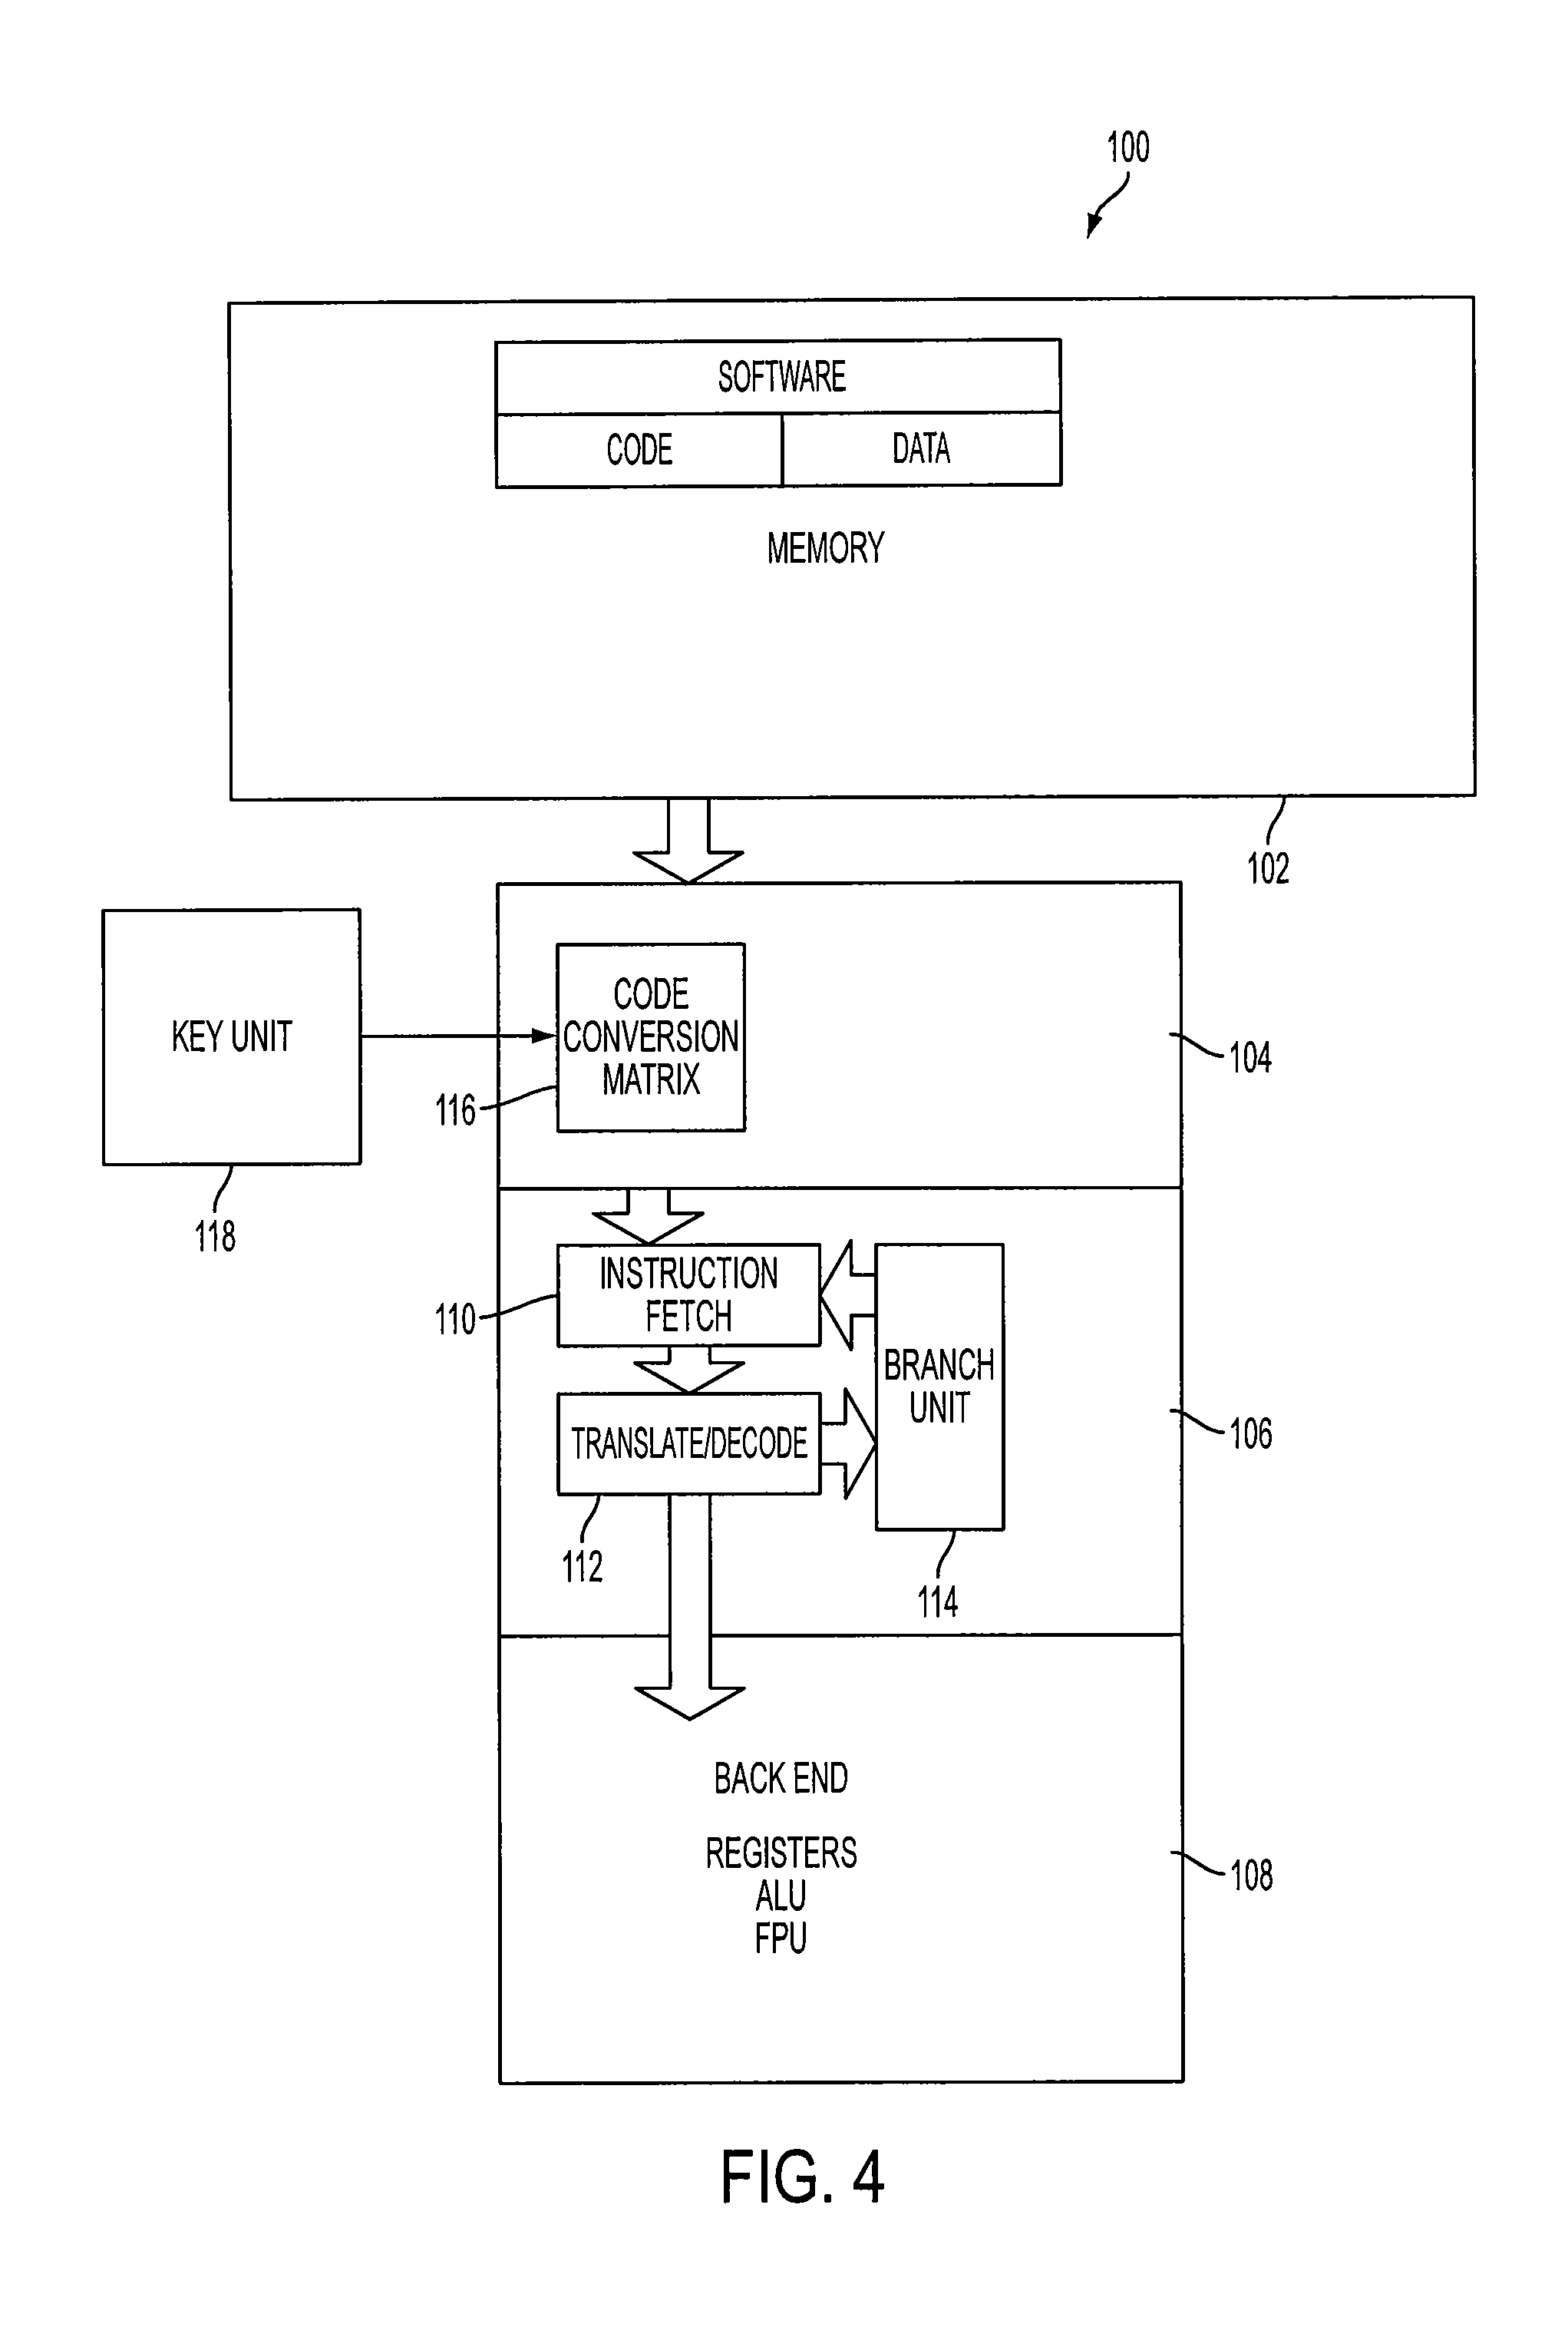 Computing device configured for operating with instructions in unique code